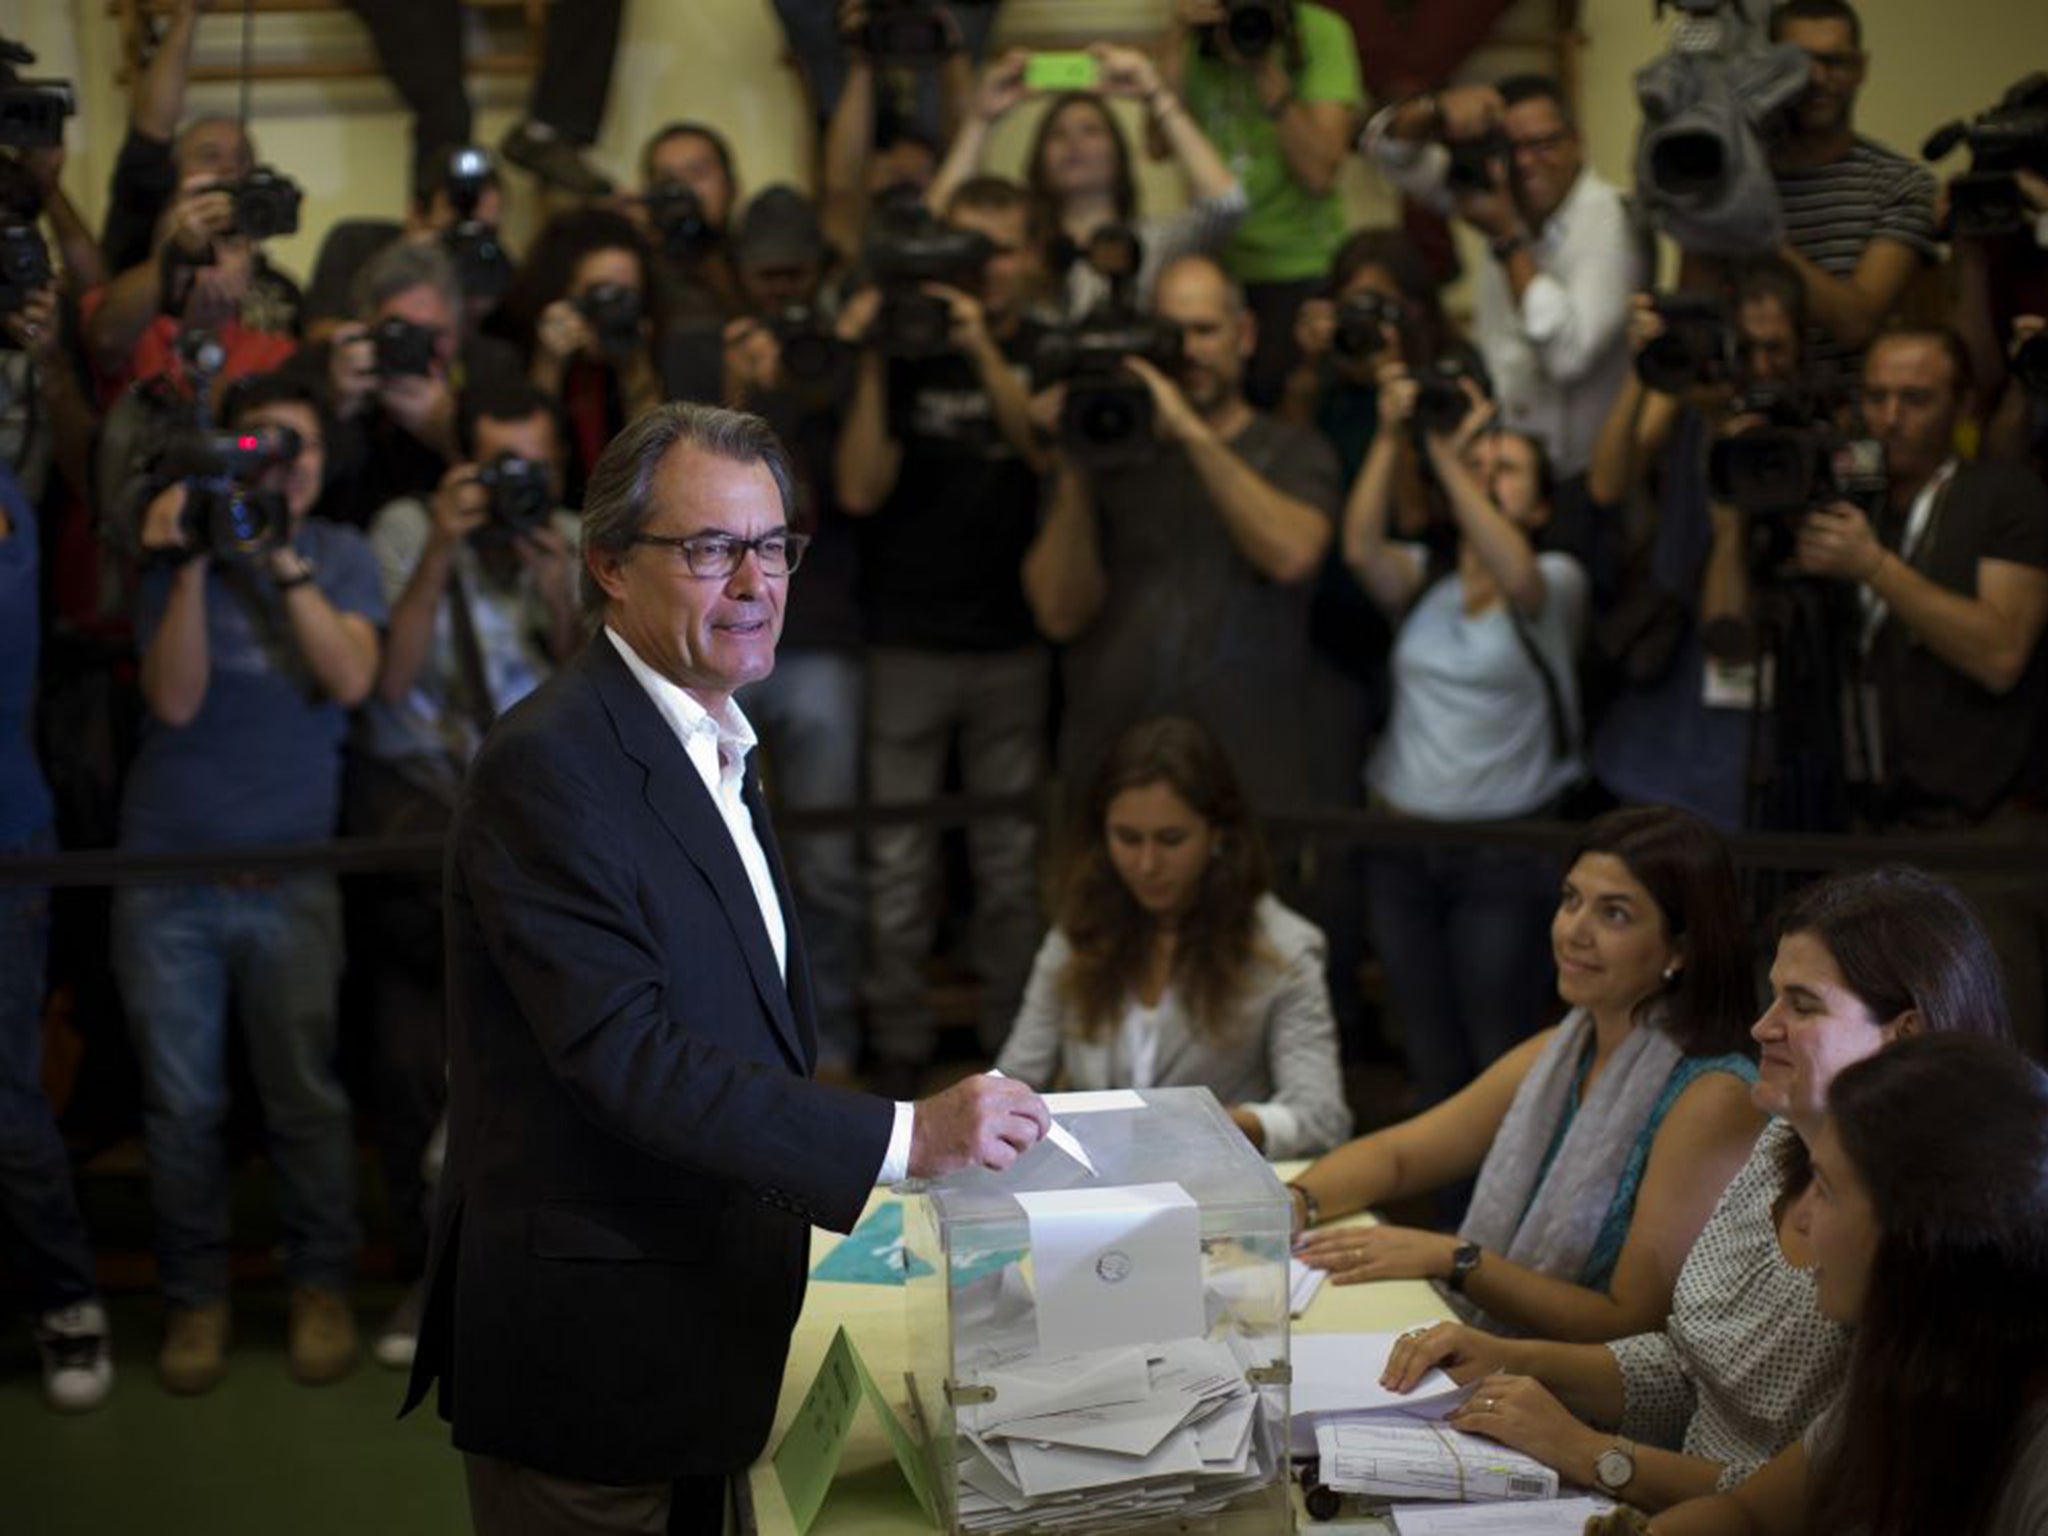 The President of Democratic Convergence of Catalonia, Artur Mas, casts his vote in yesterday’s regional elections in Spain